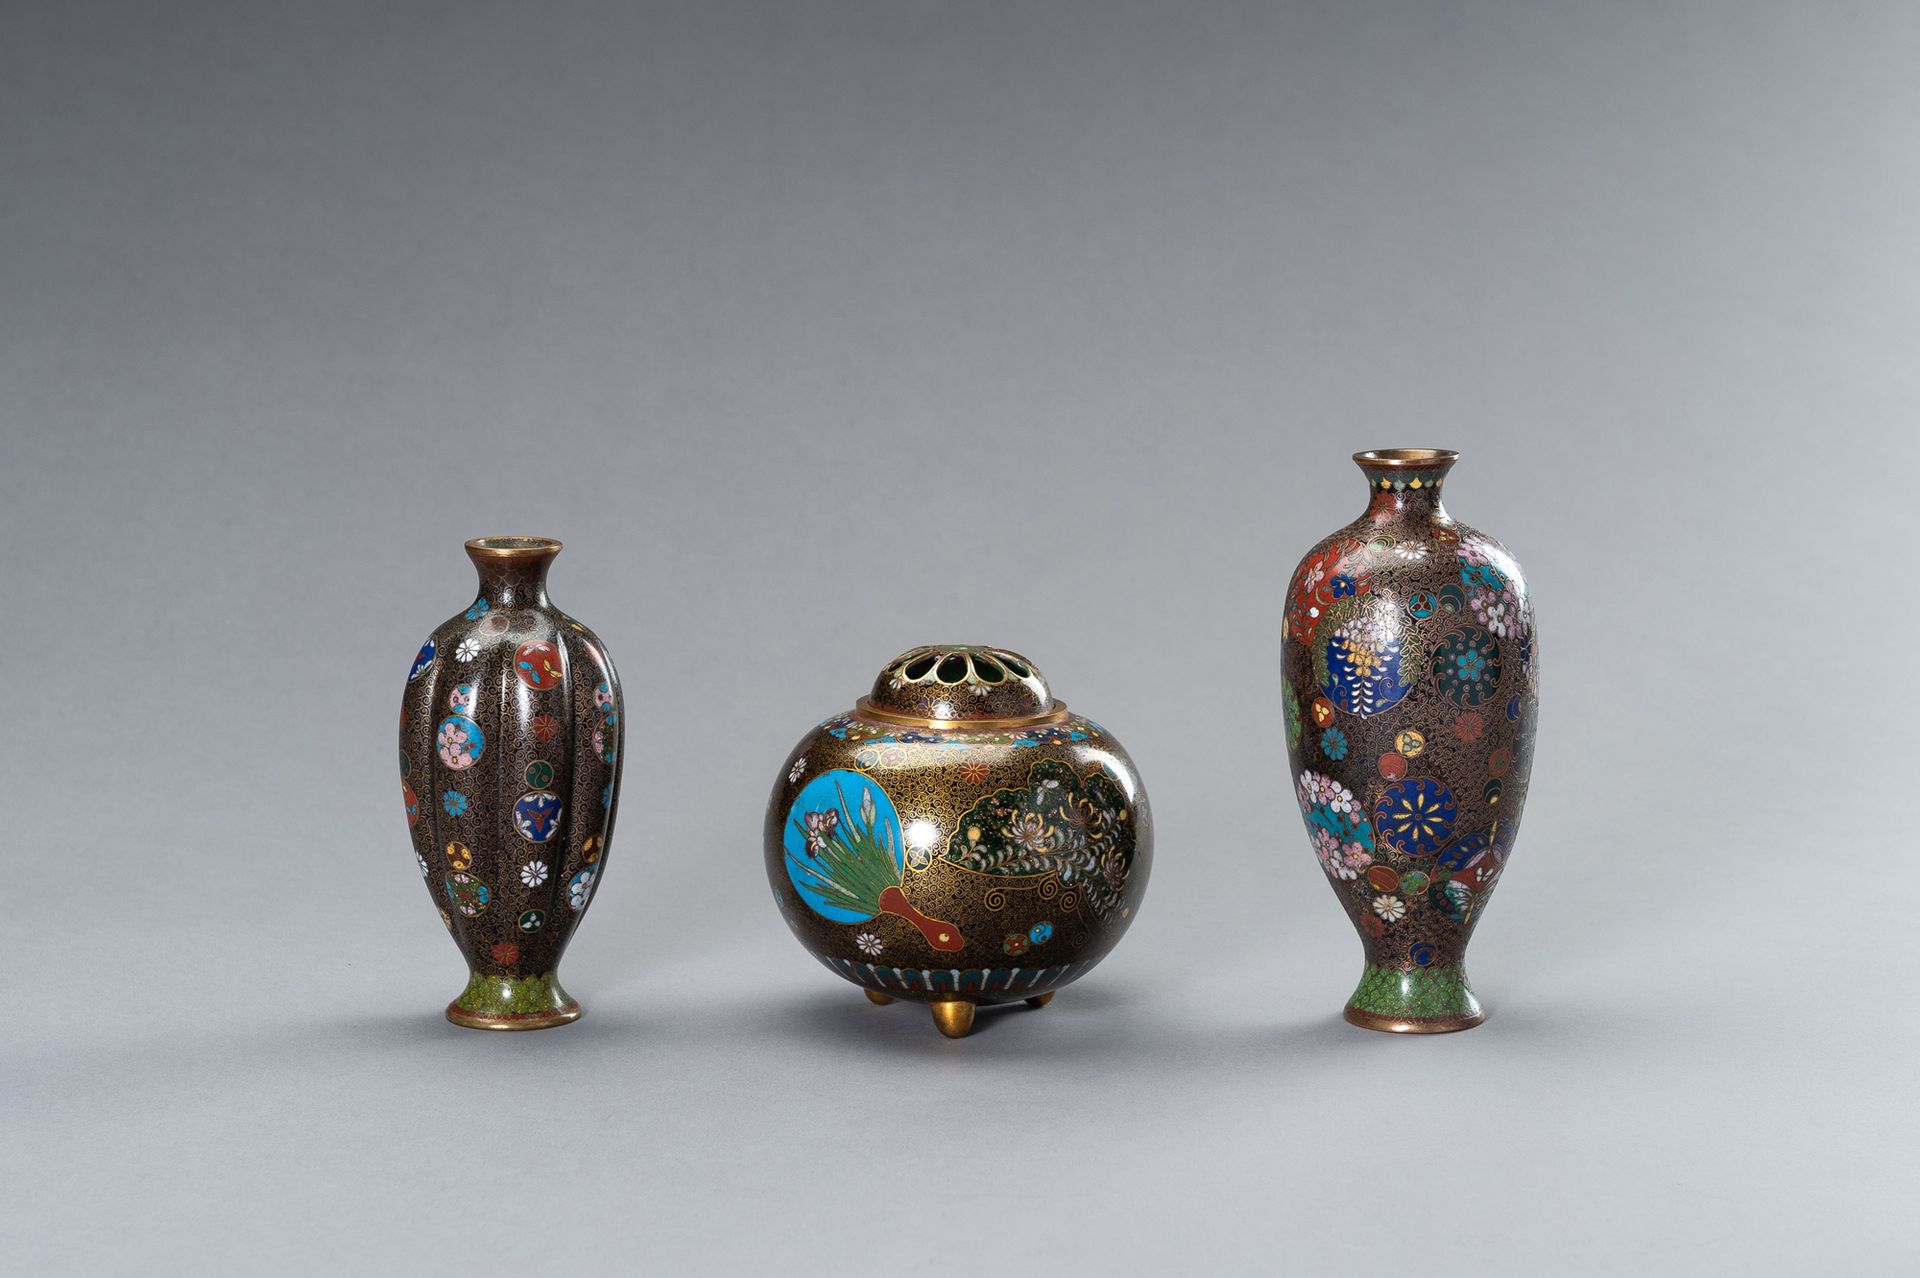 TWO GINBARI CLOISONNÉ VASES AND A CLOISONNÉ KORO (INCENSE BURNER) TWO GINBARI CL&hellip;